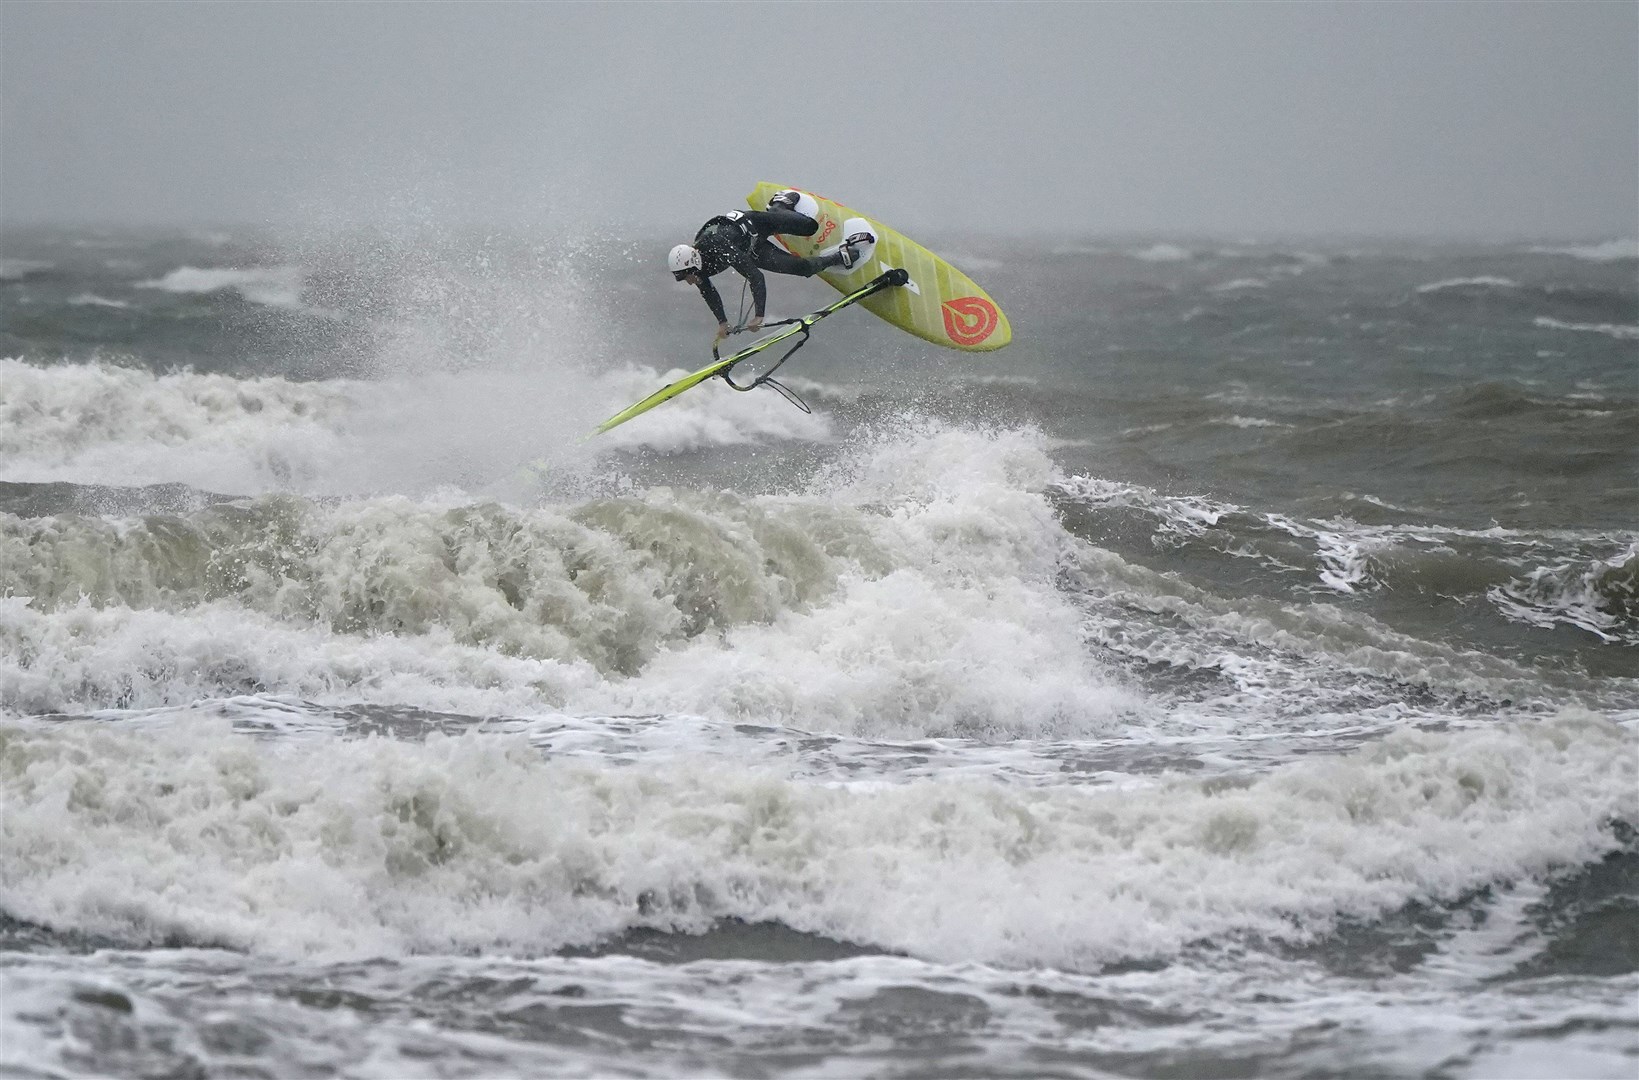 But such conditions are perfect for some – with this wind surfer making the most of the weather in Bracklesham Bay, West Sussex (PA)